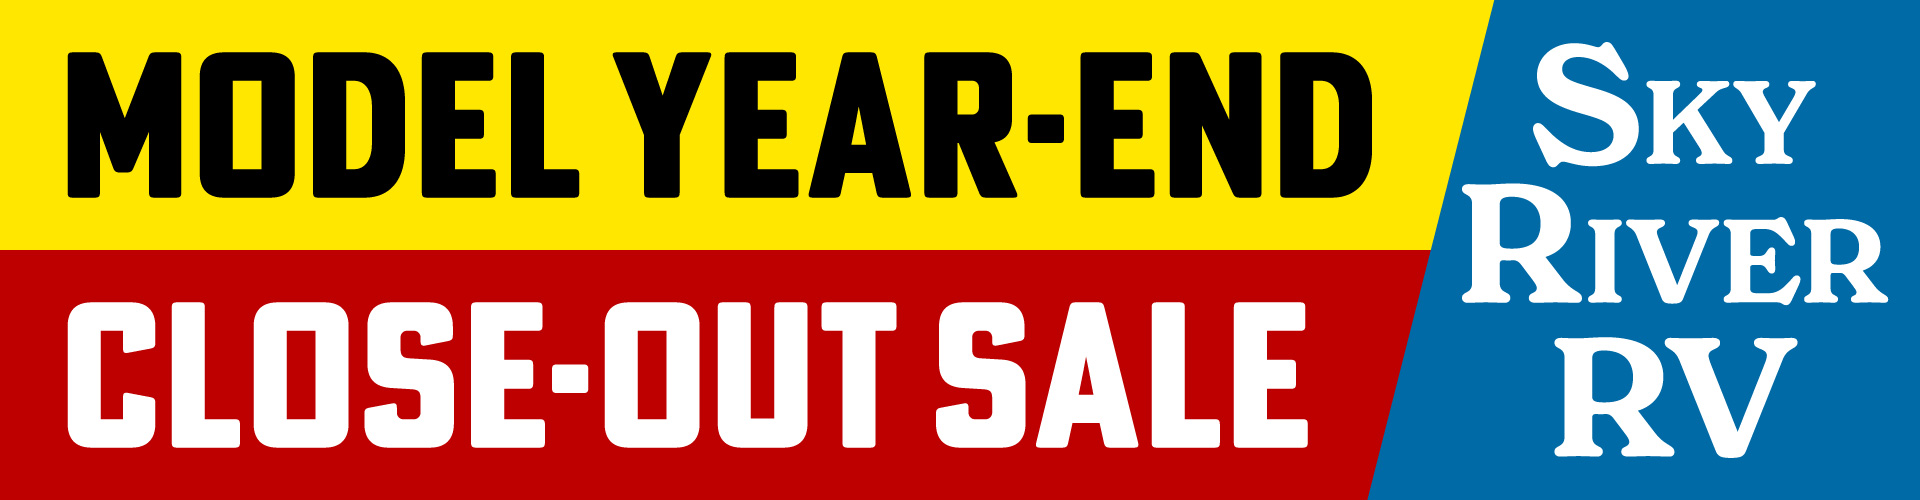 Model Year-End Close-Out Sale